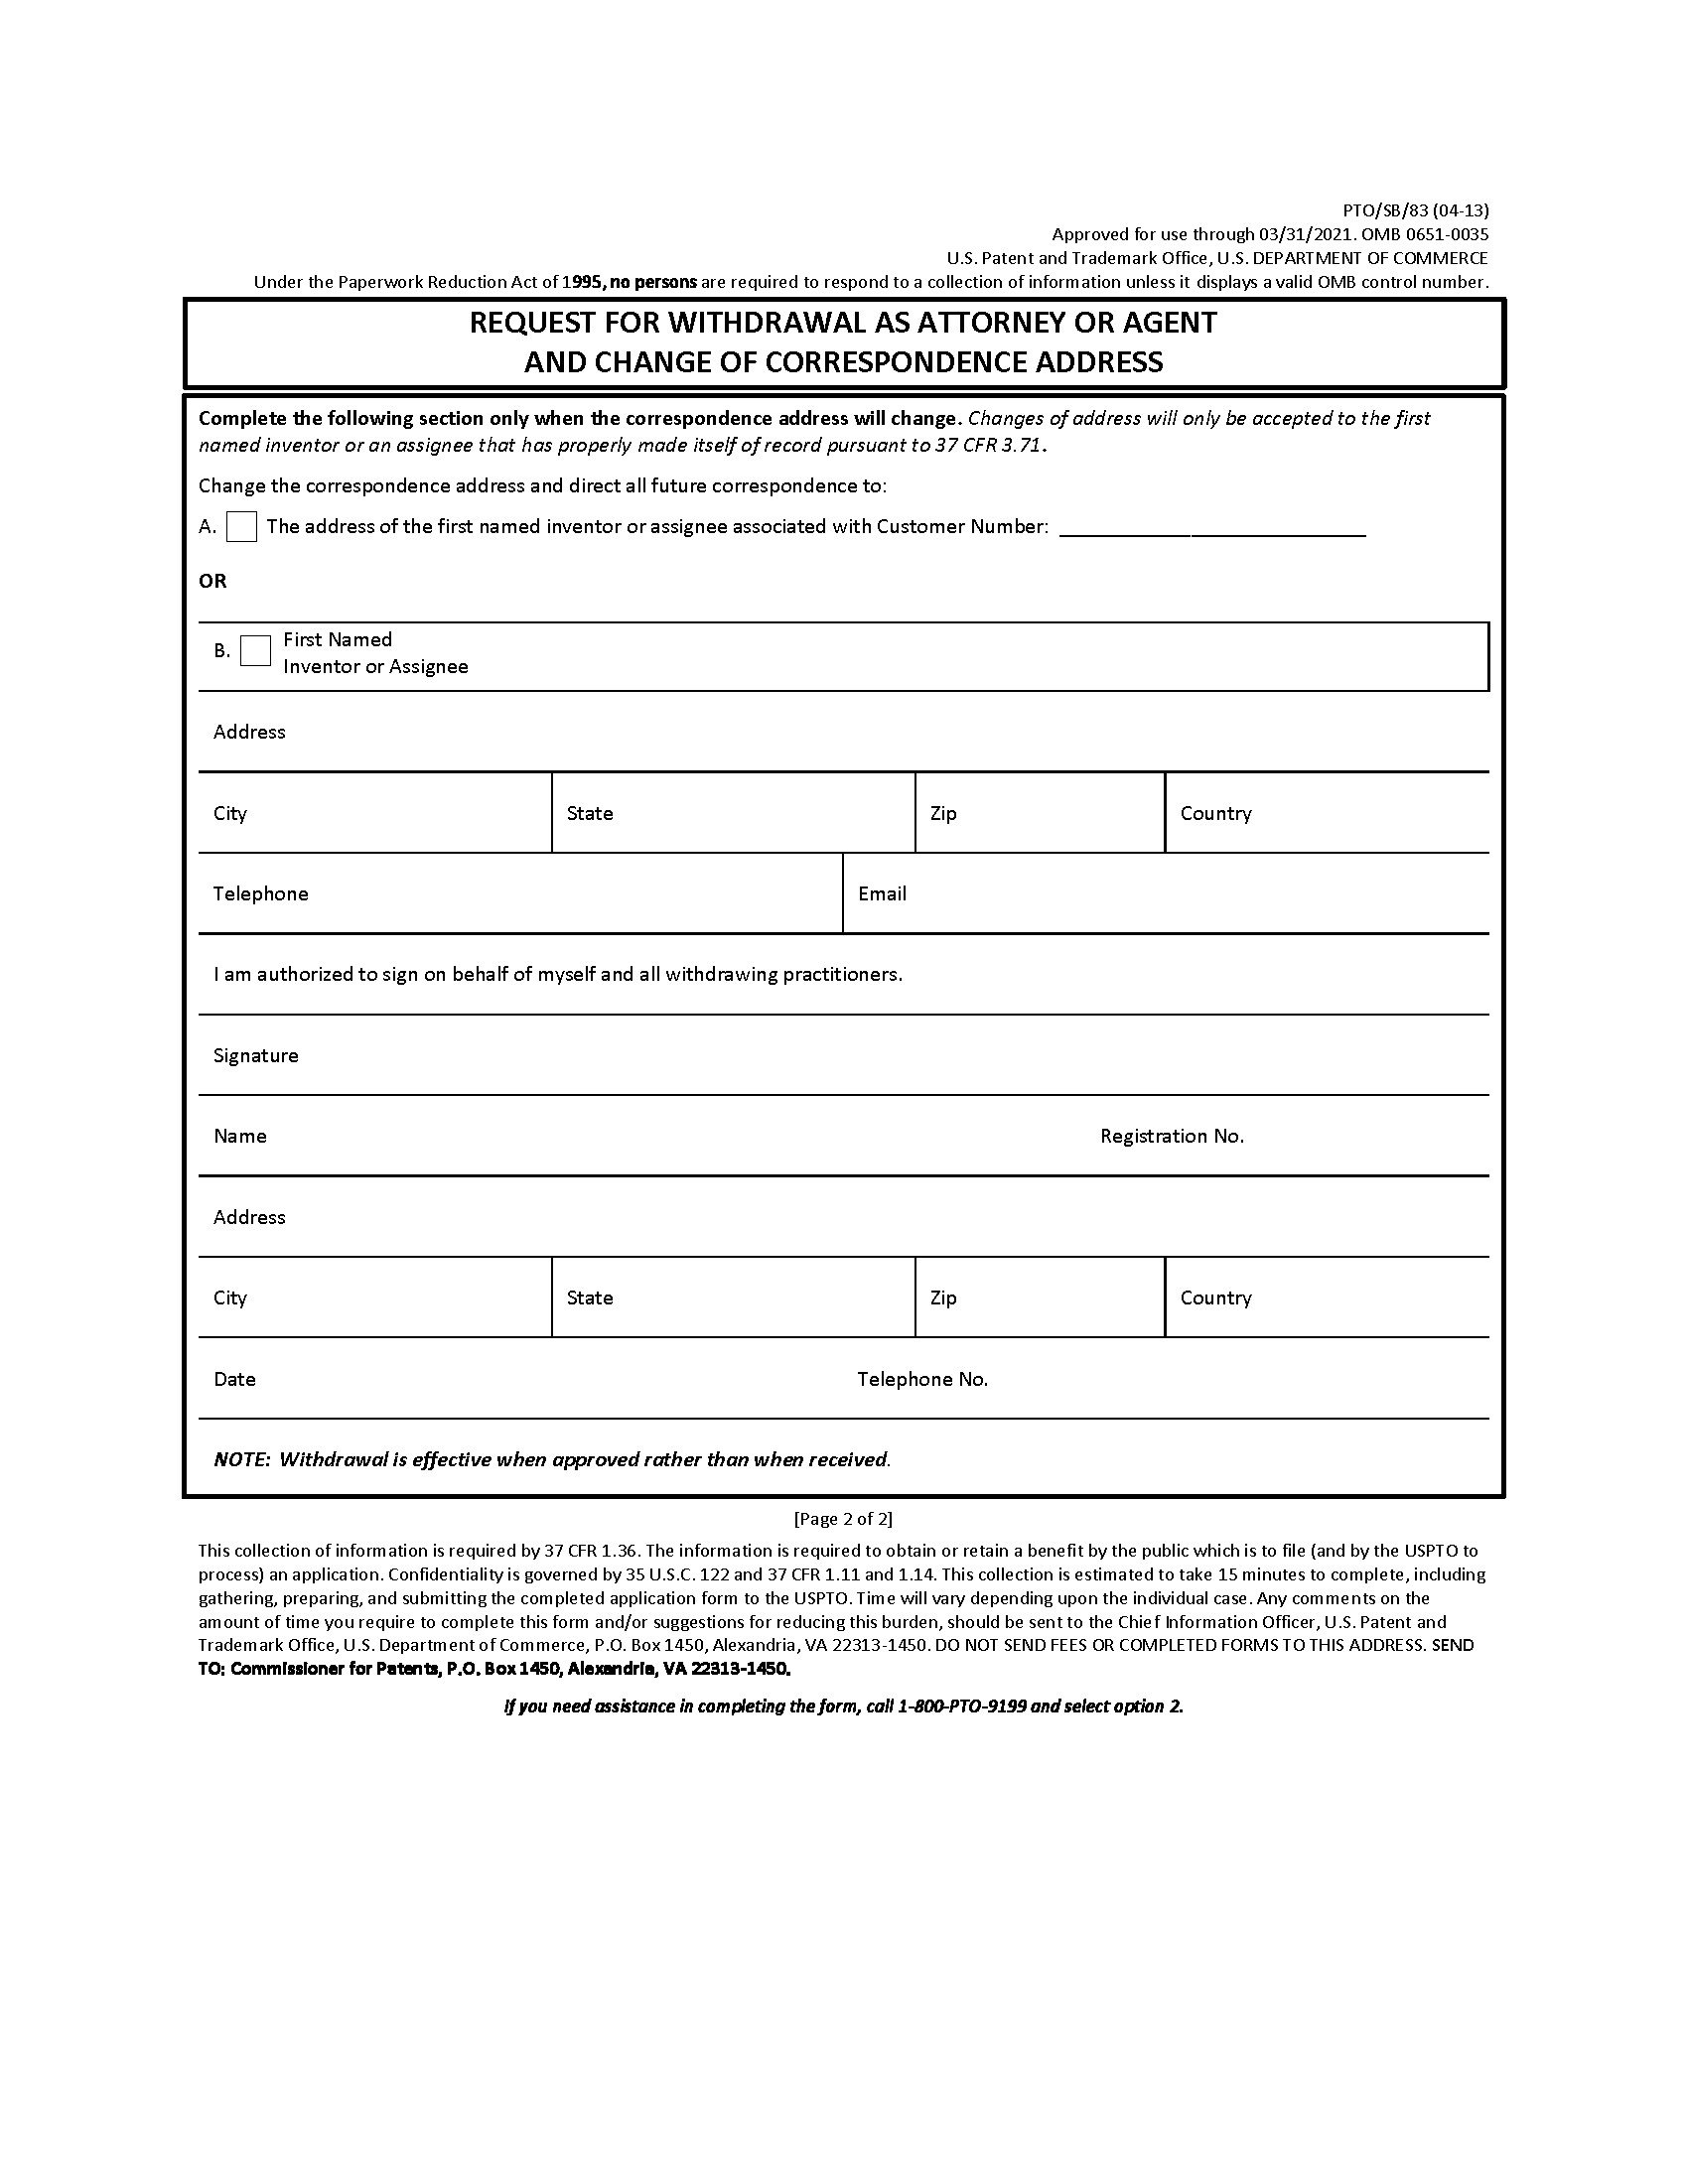 PTO/SB/83. Request for Withdrawal as Attorney or Agent and Change of Correspondence Address (Page 2 of 2)